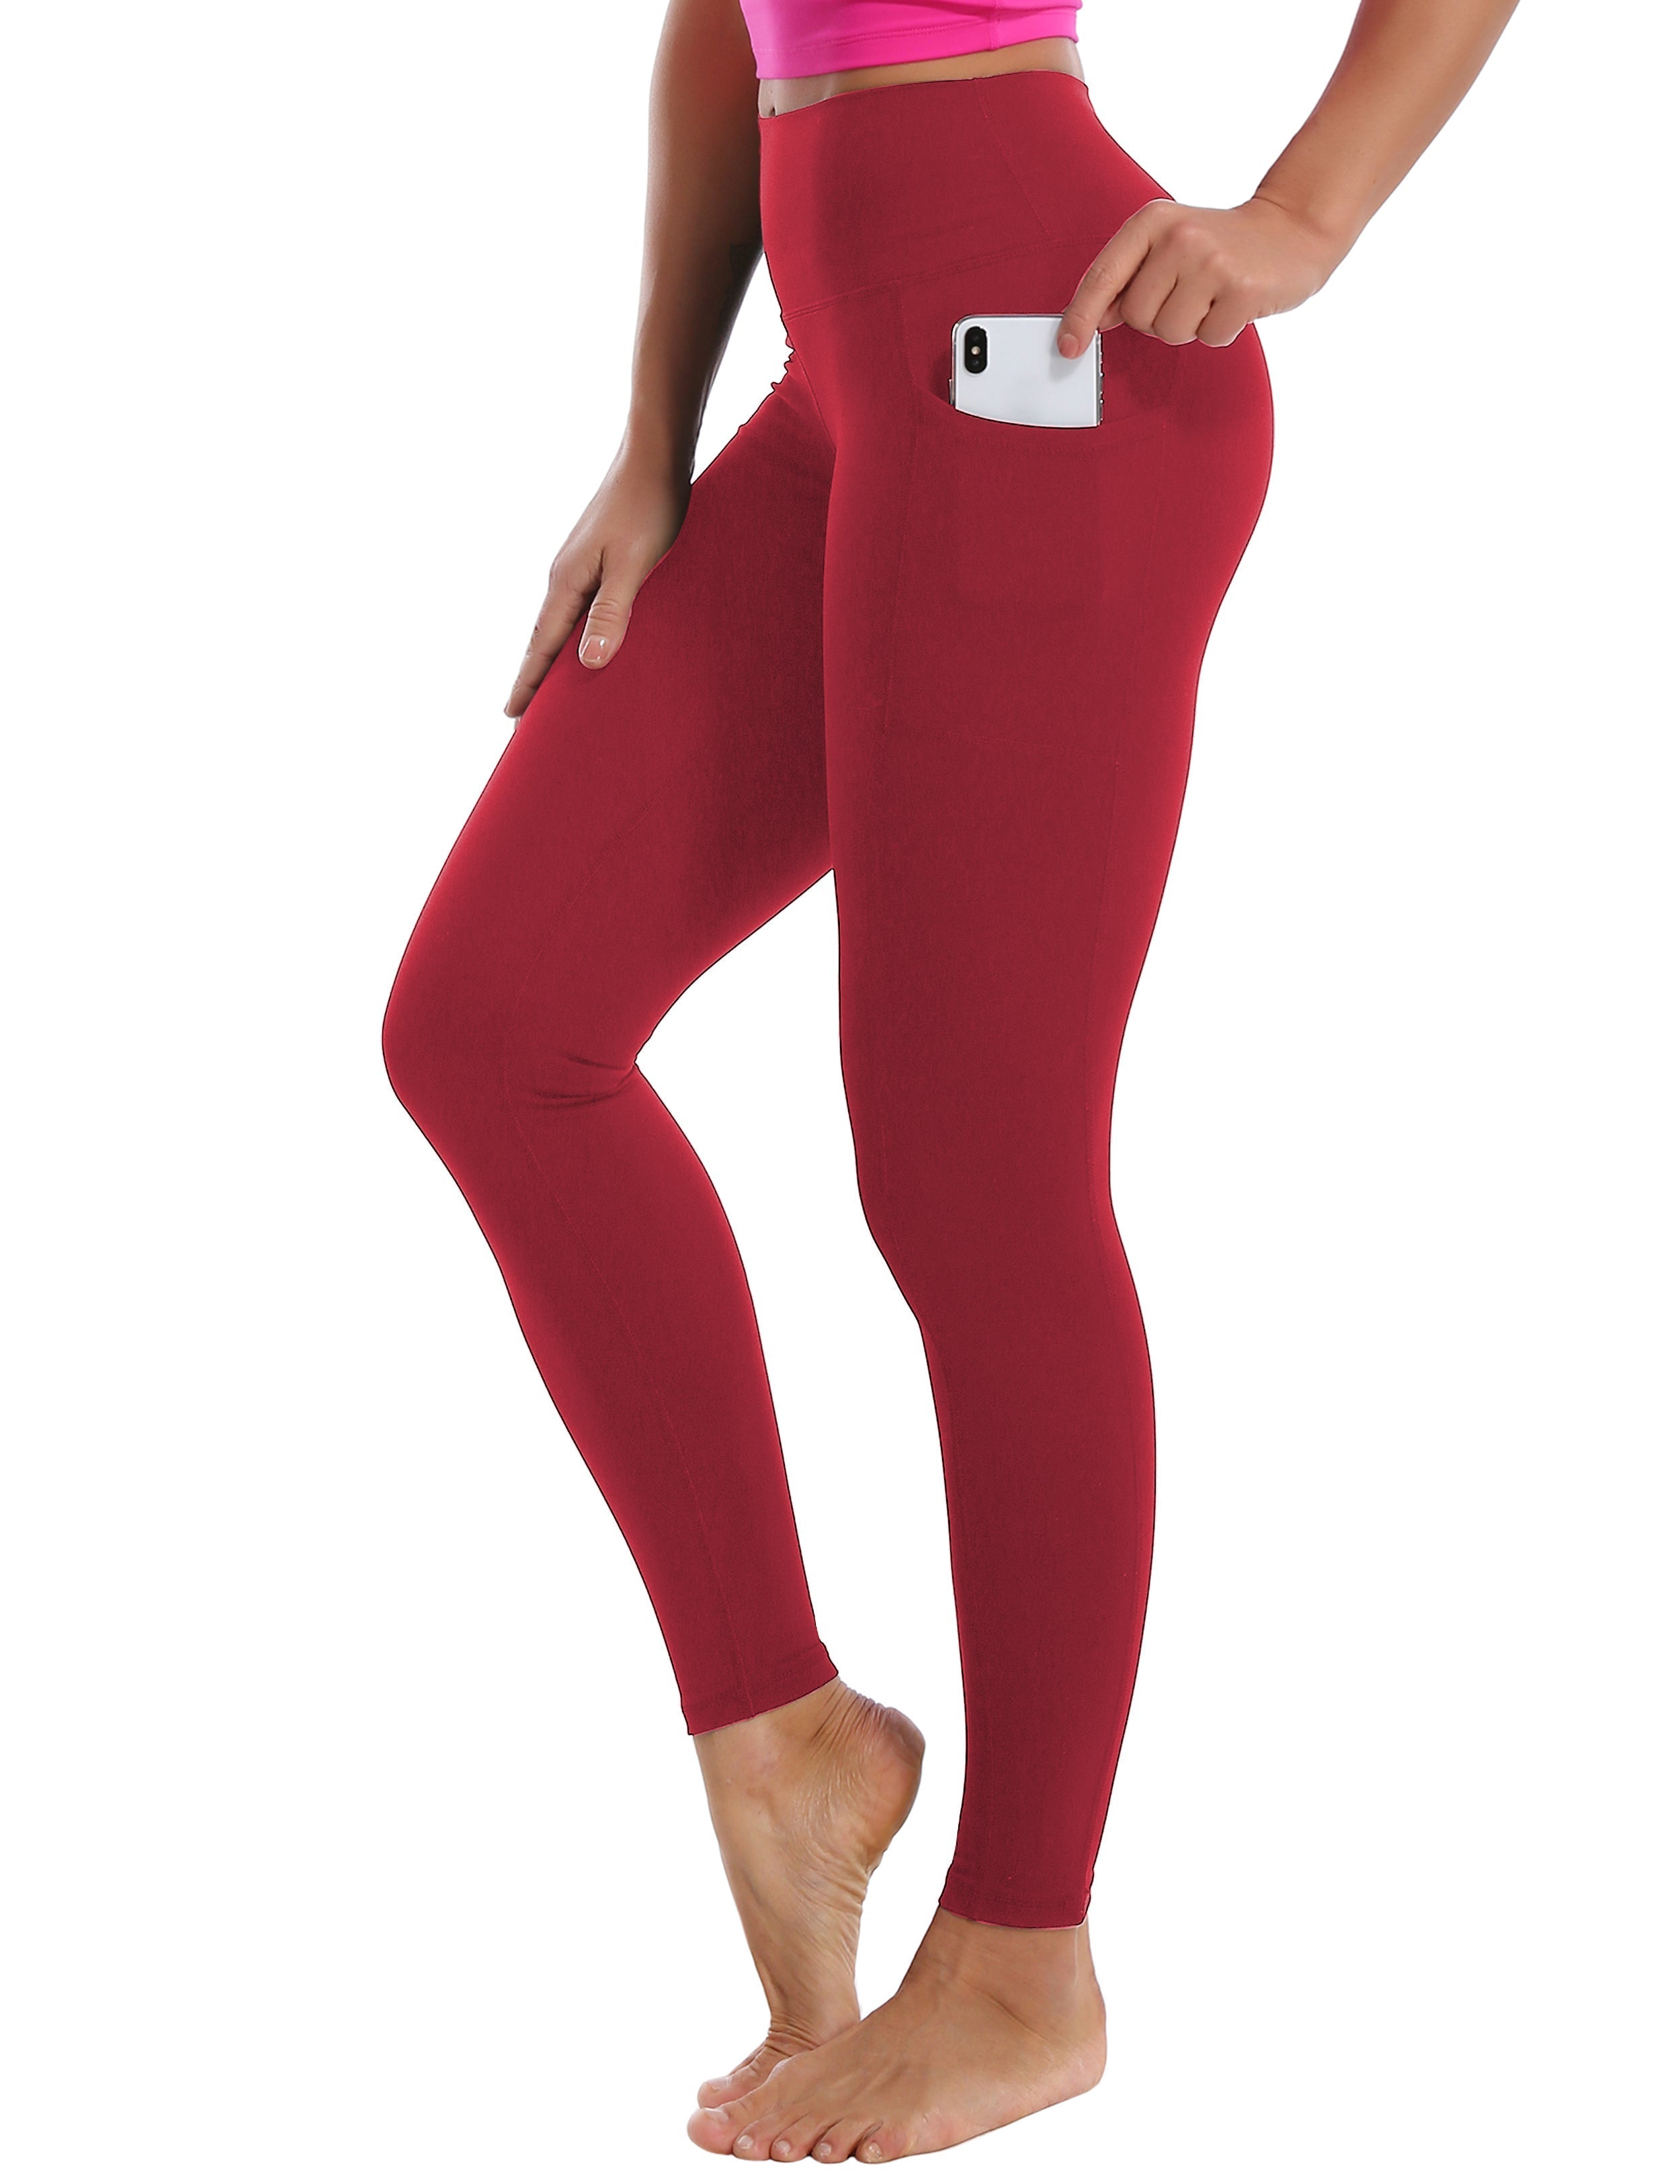 High Waisted Plus Size Pants 7/8 Length Leggings with Pockets red_Plus Size